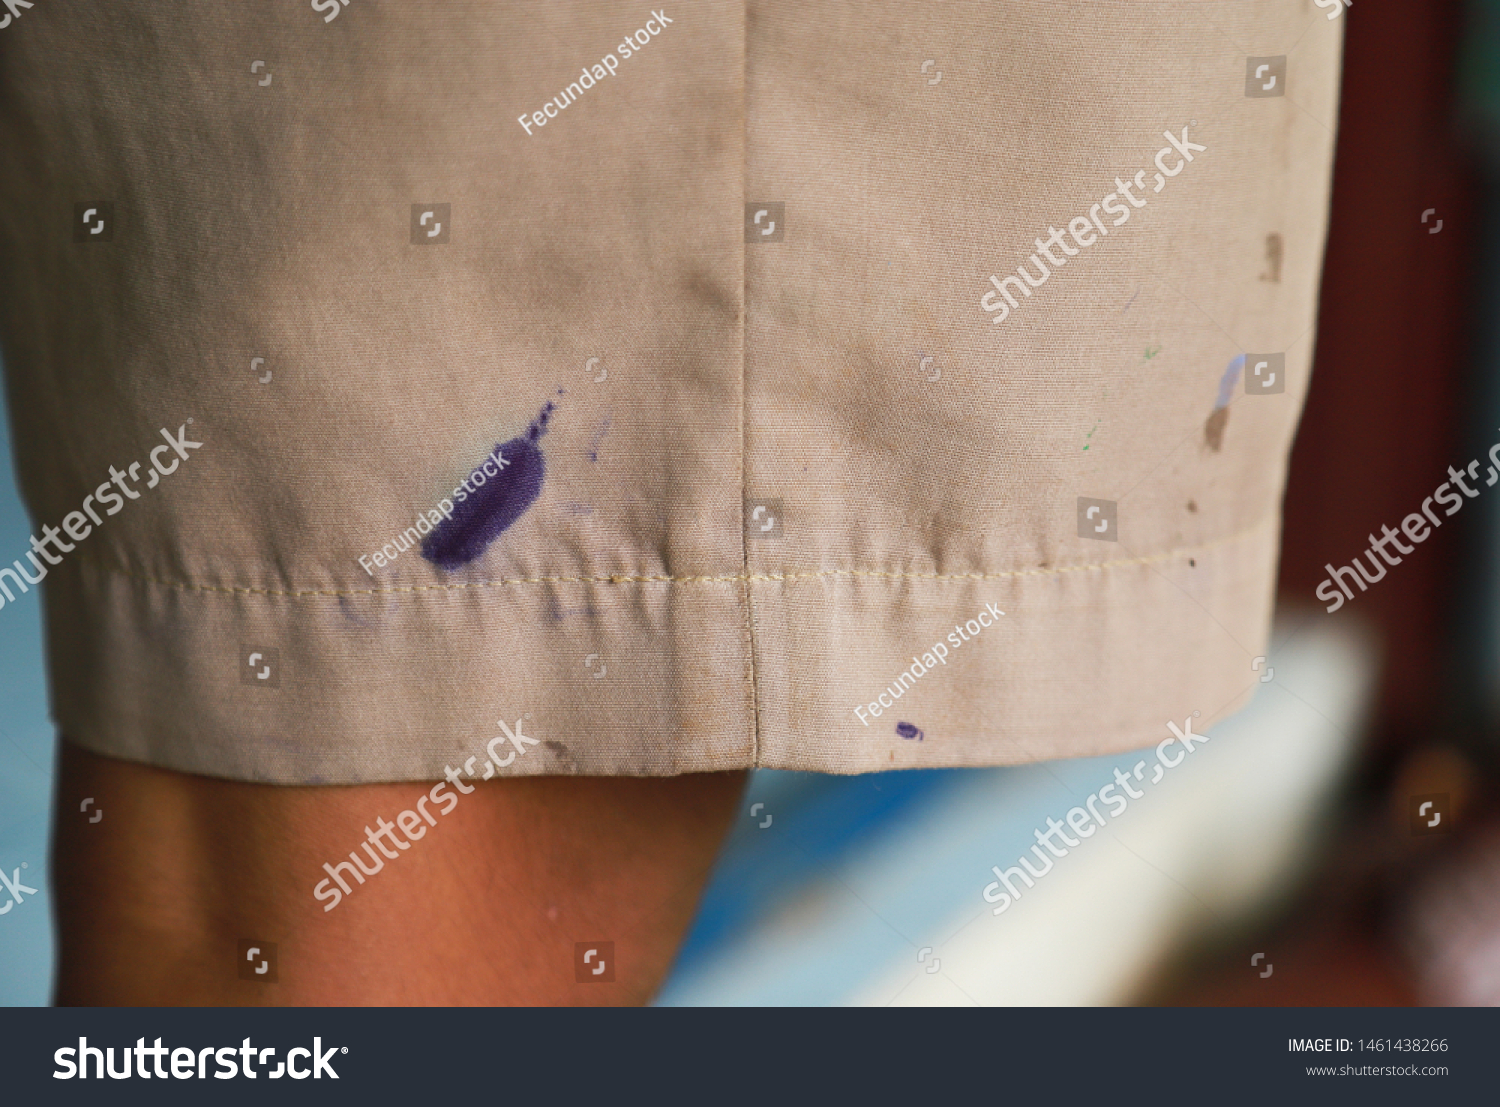 Dirty ink and mud stain on clothes from unexpected accident in daily life. dirt stains for cleaning and washing concept #1461438266